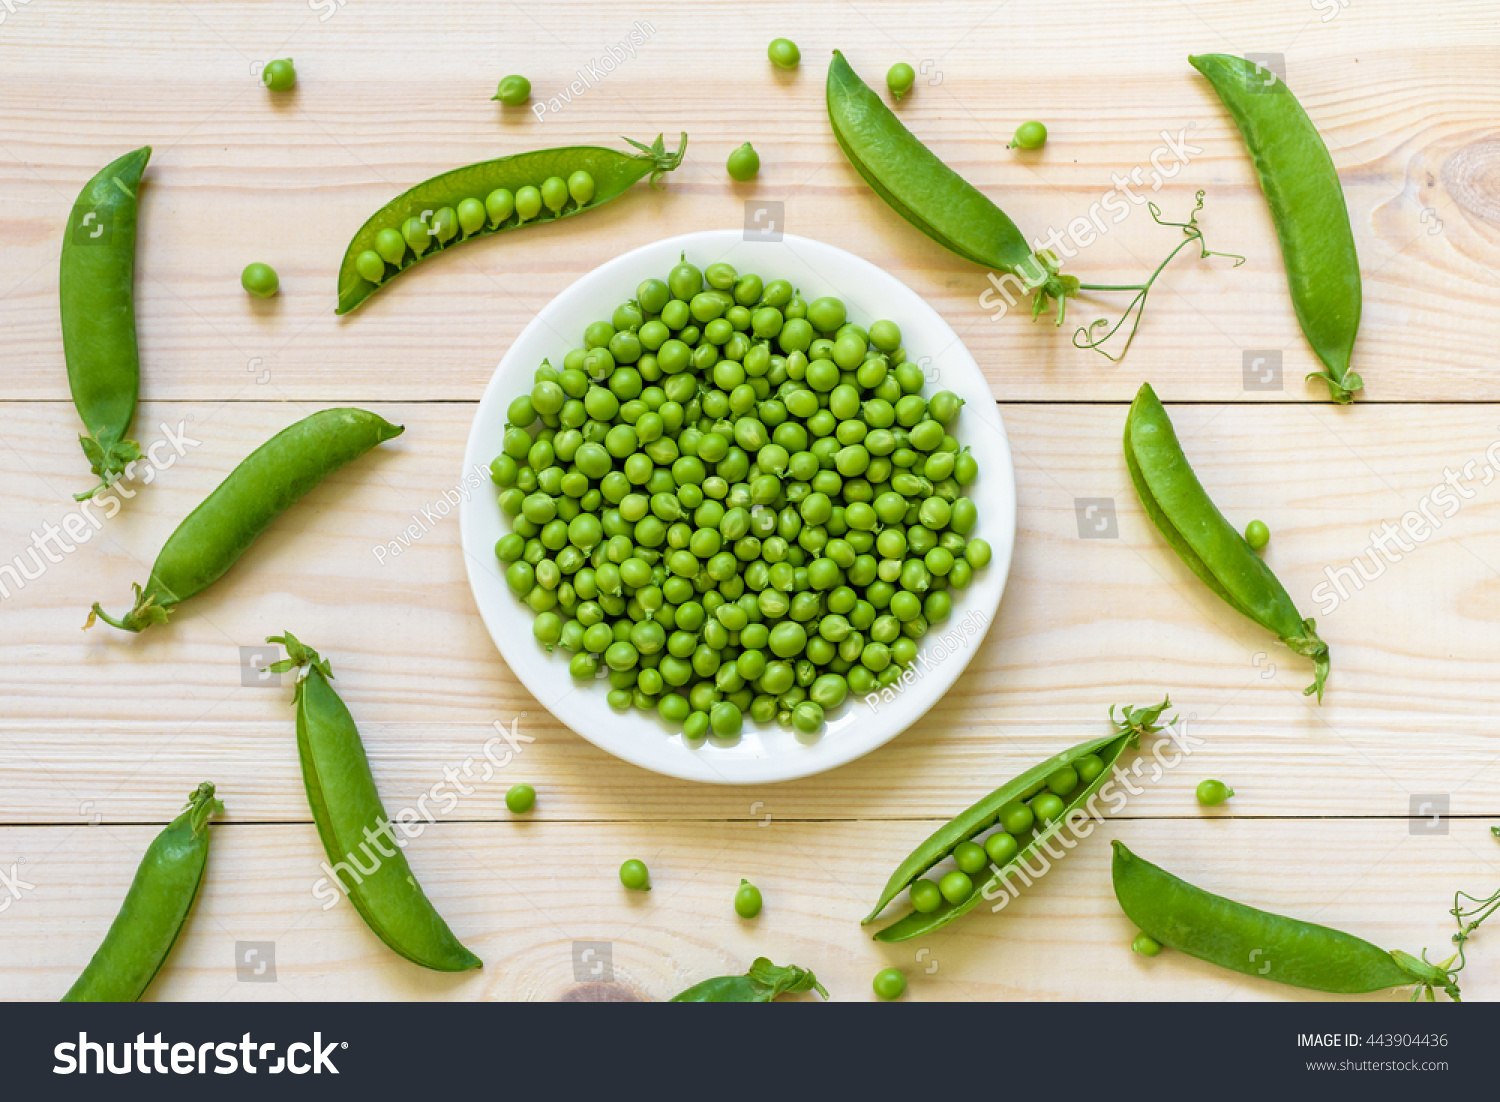 Green pea in bowl of top view on rustic wooden background with copy space, natural wooden table. Flat lay.  #443904436